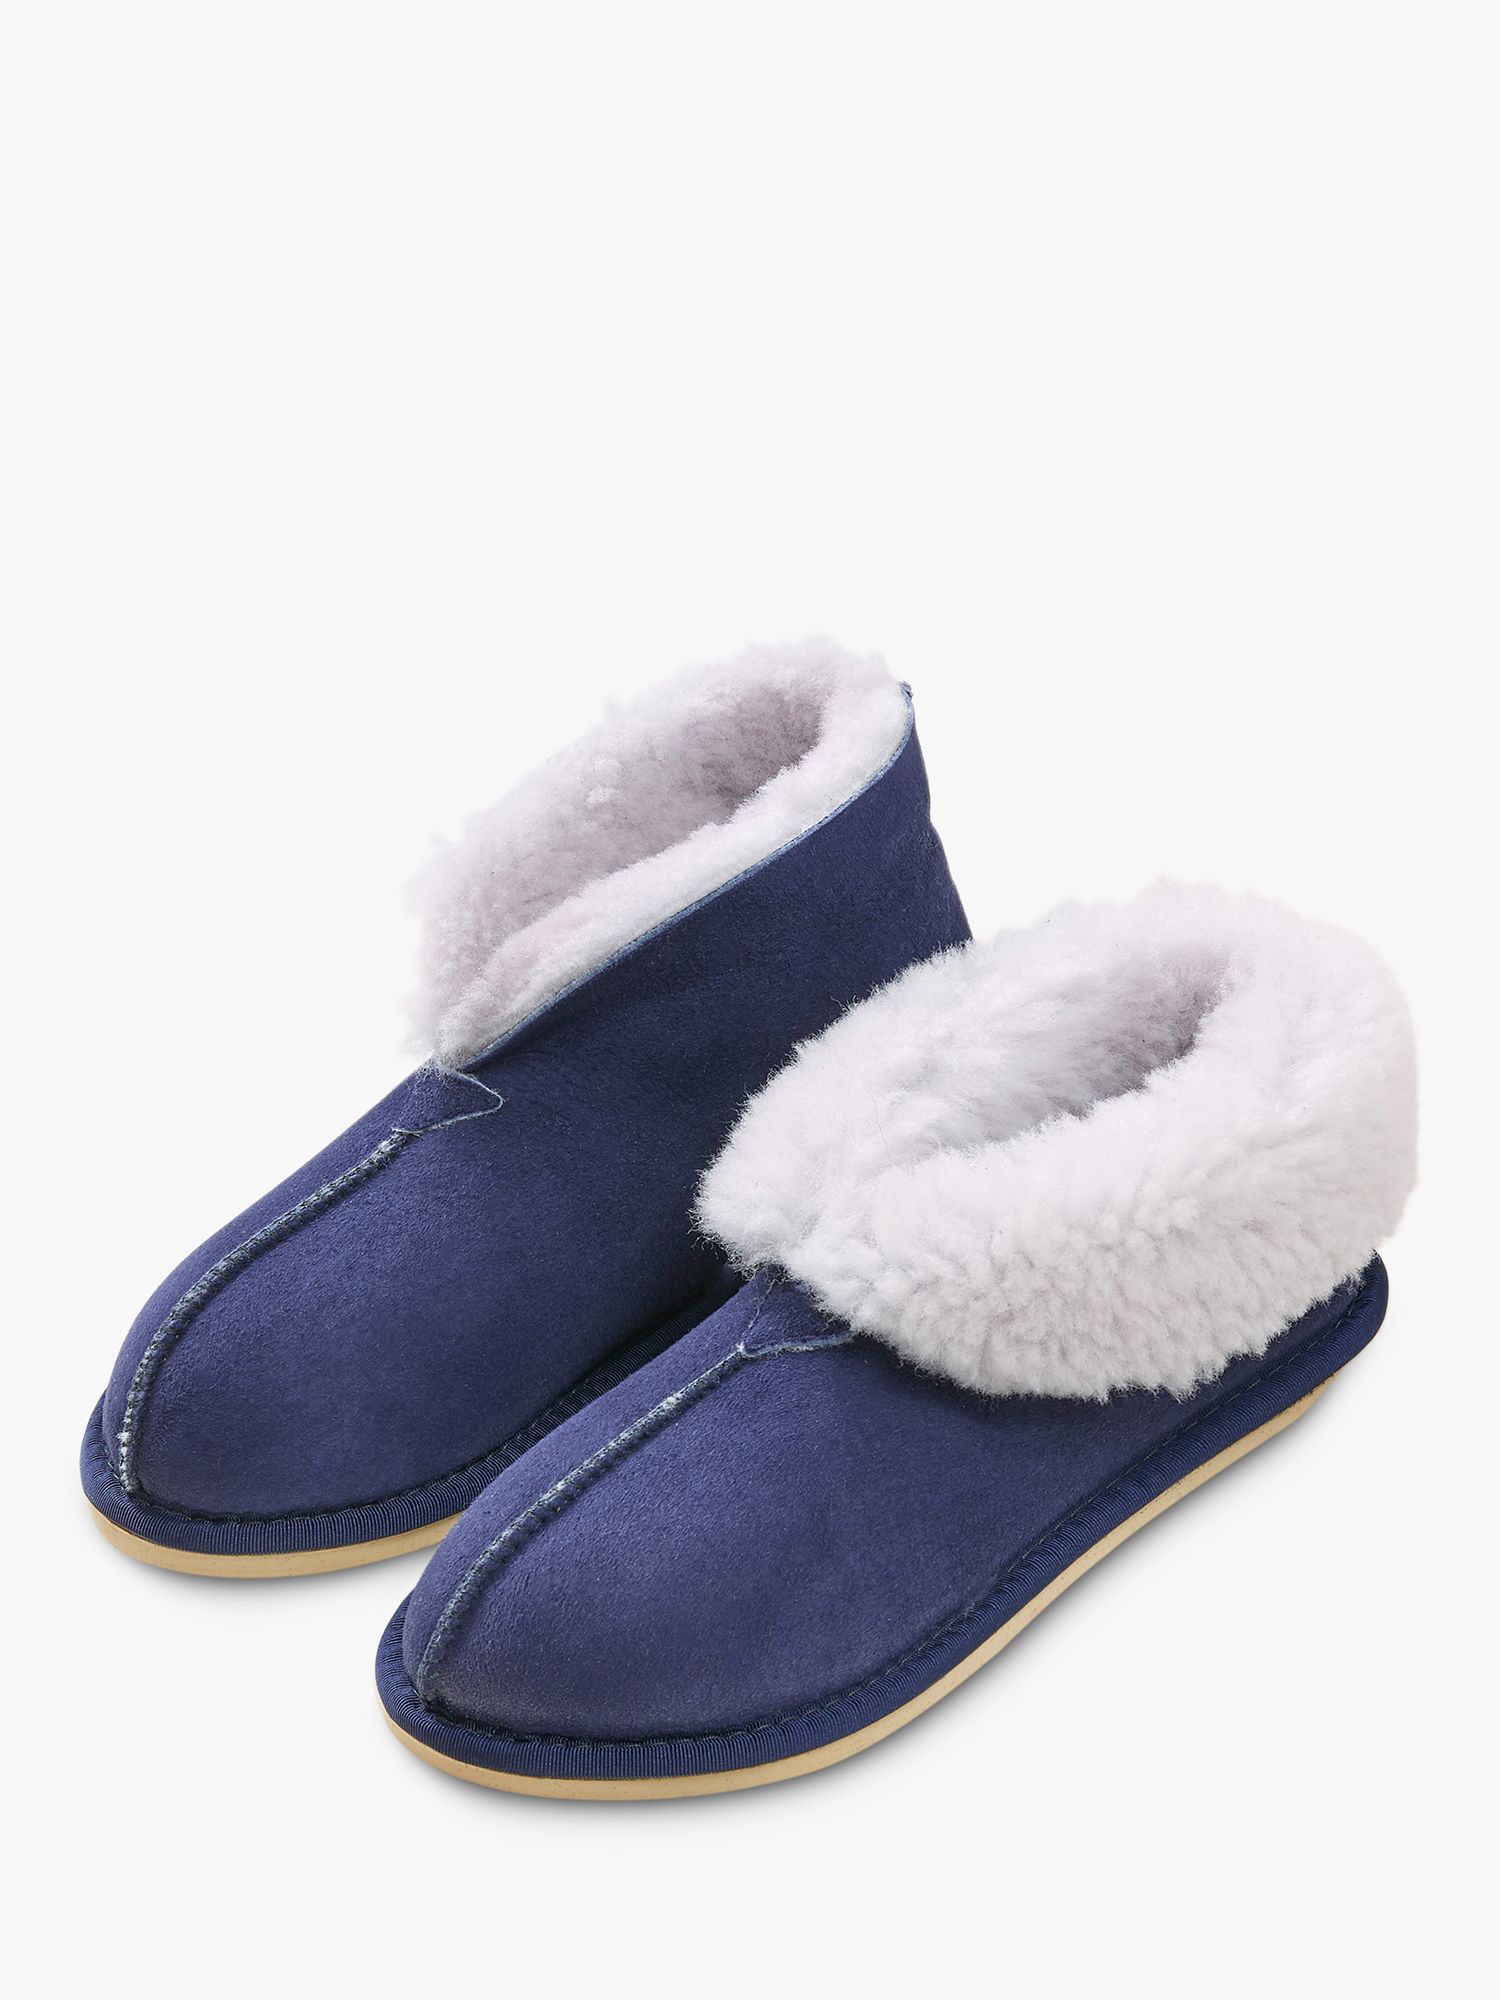 Buy Celtic & Co. Sheepskin Bootee Slippers Online at johnlewis.com